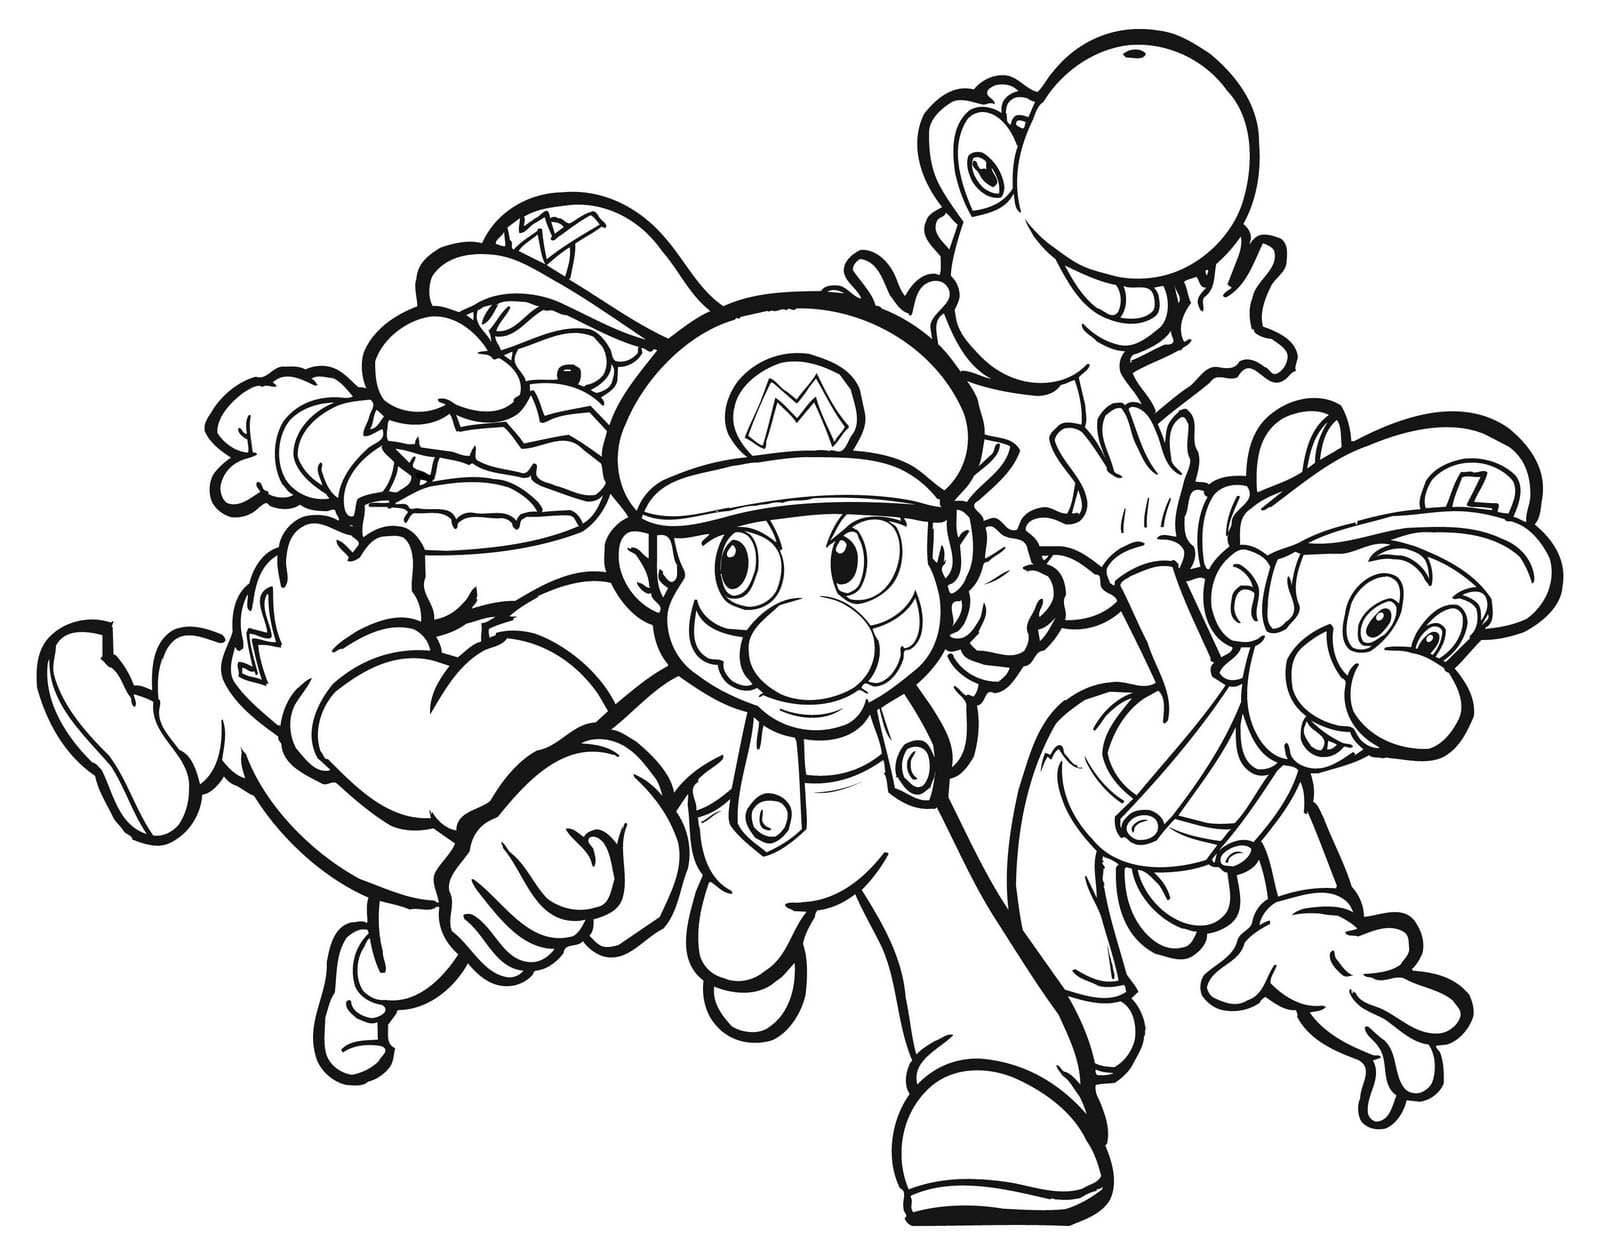 Super Mario 08 from Super Mario coloring page to print and color